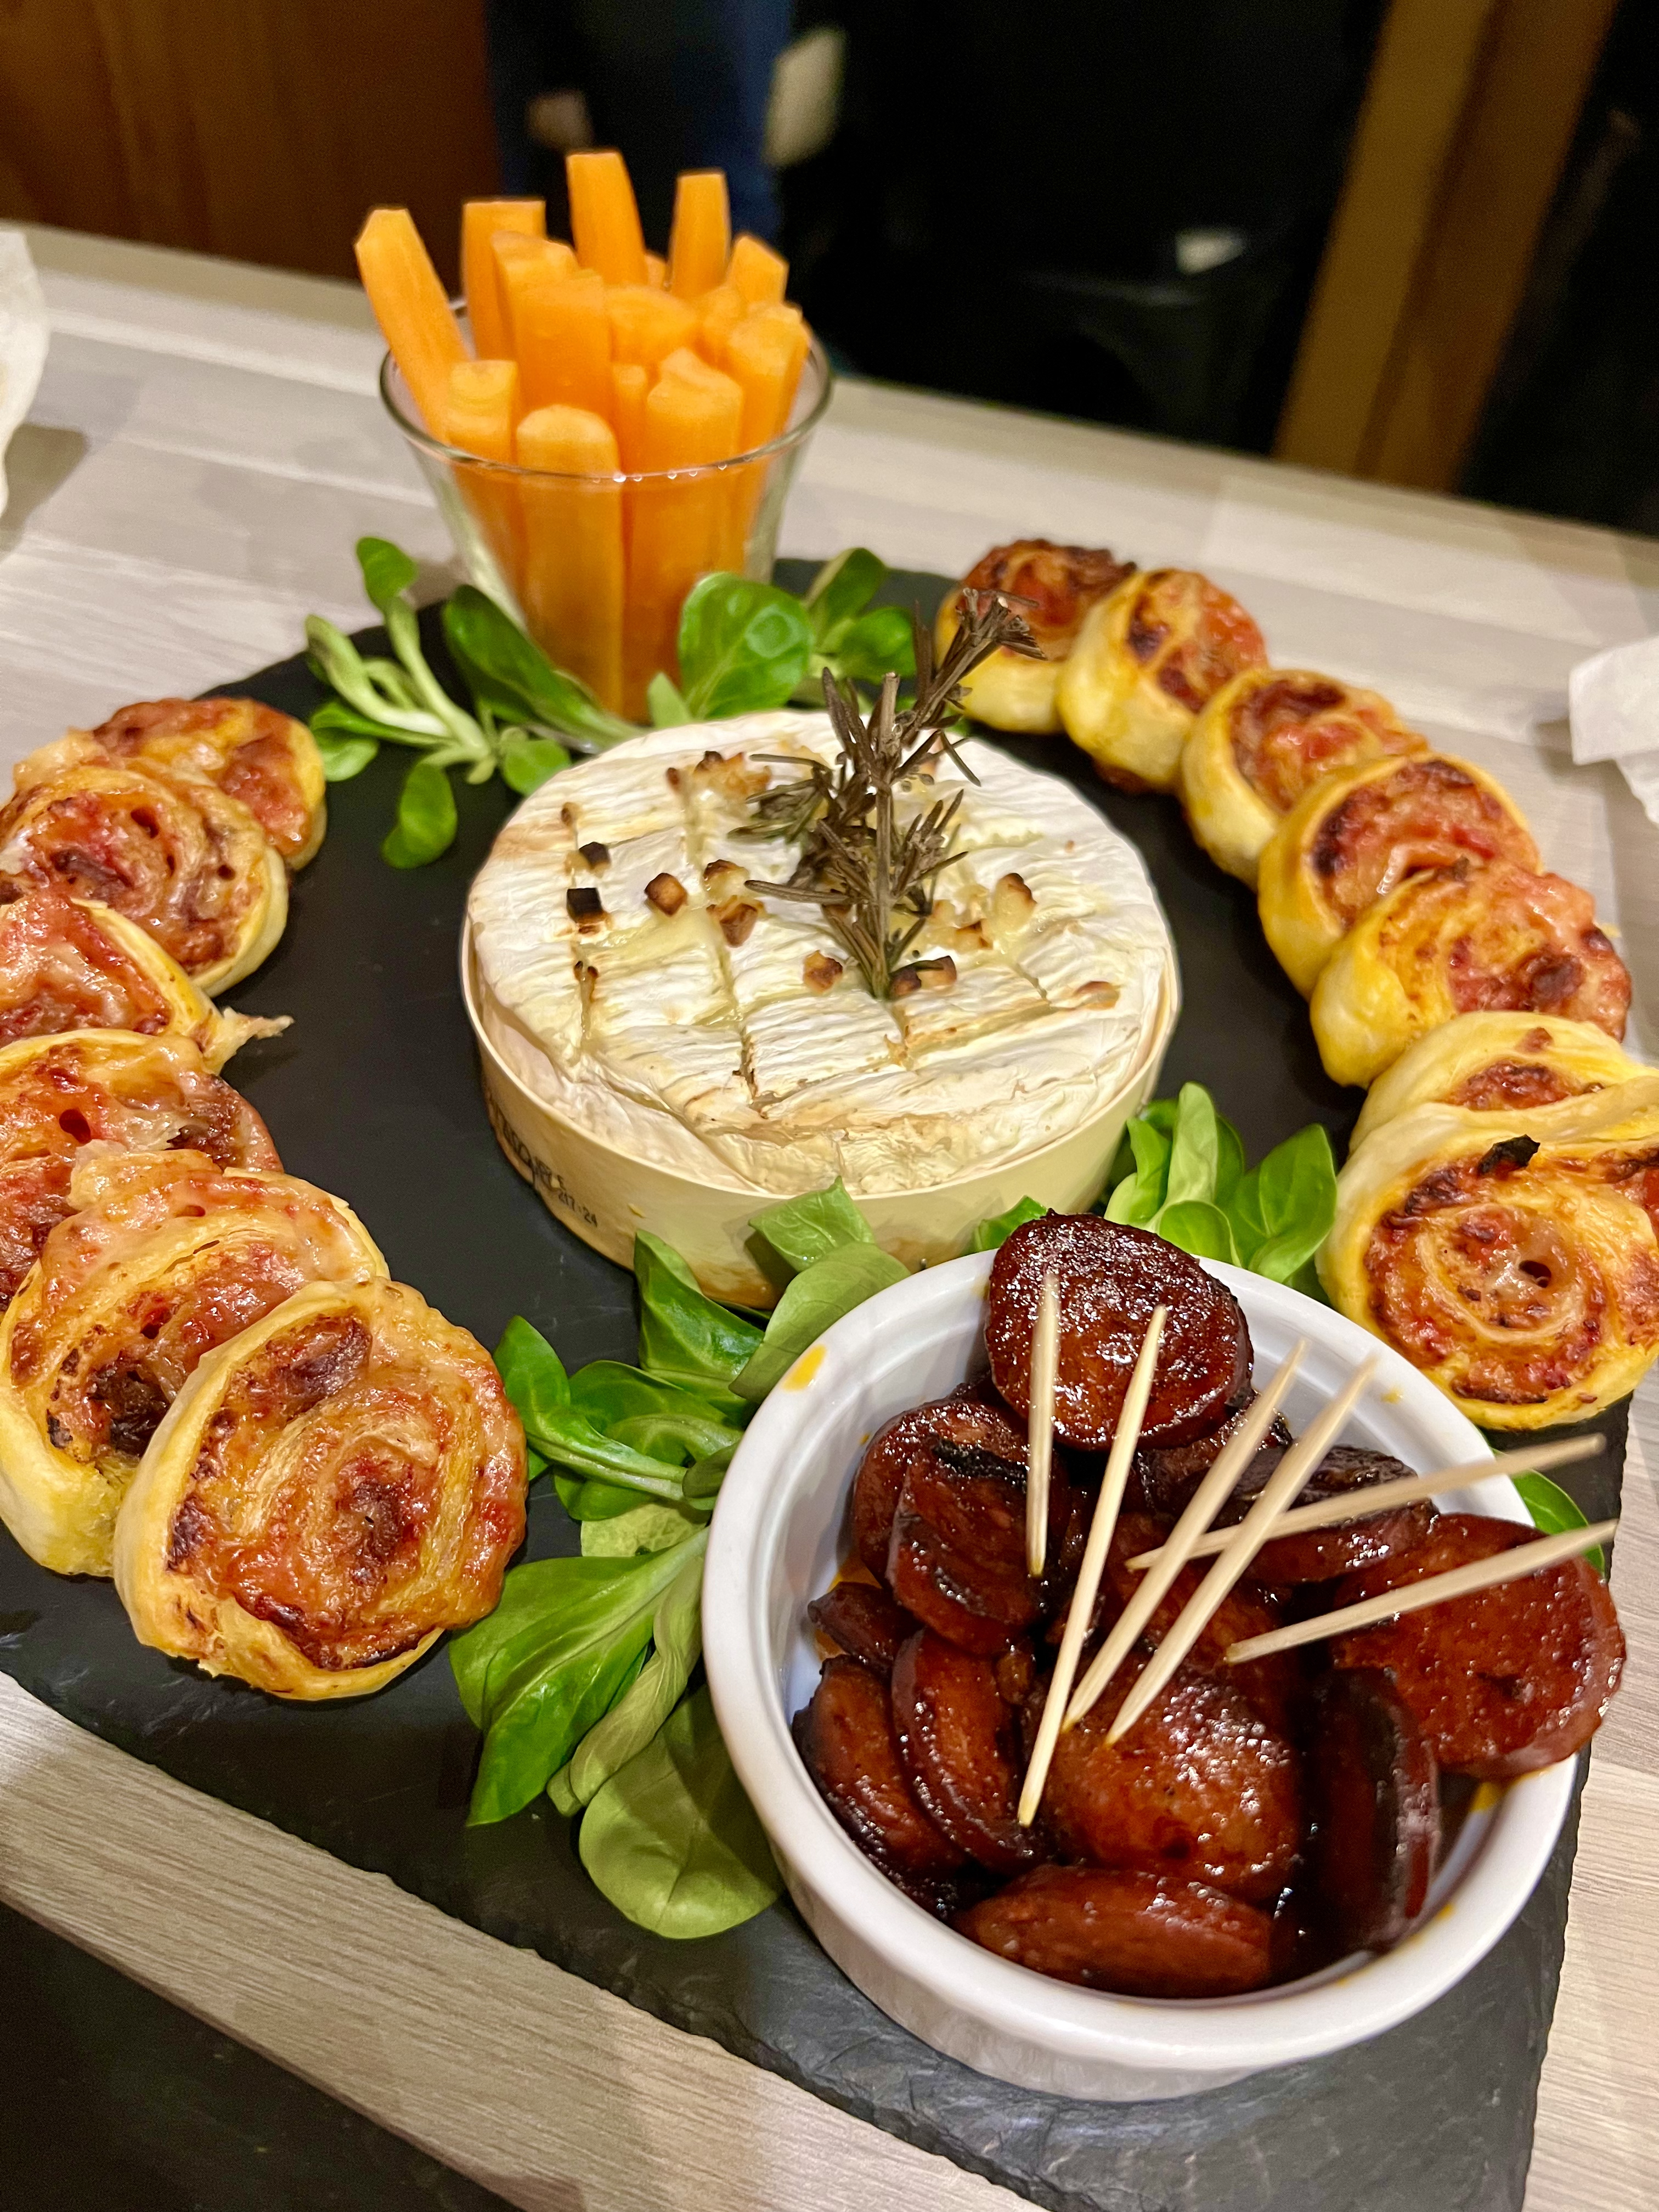 Camembert and Canapes